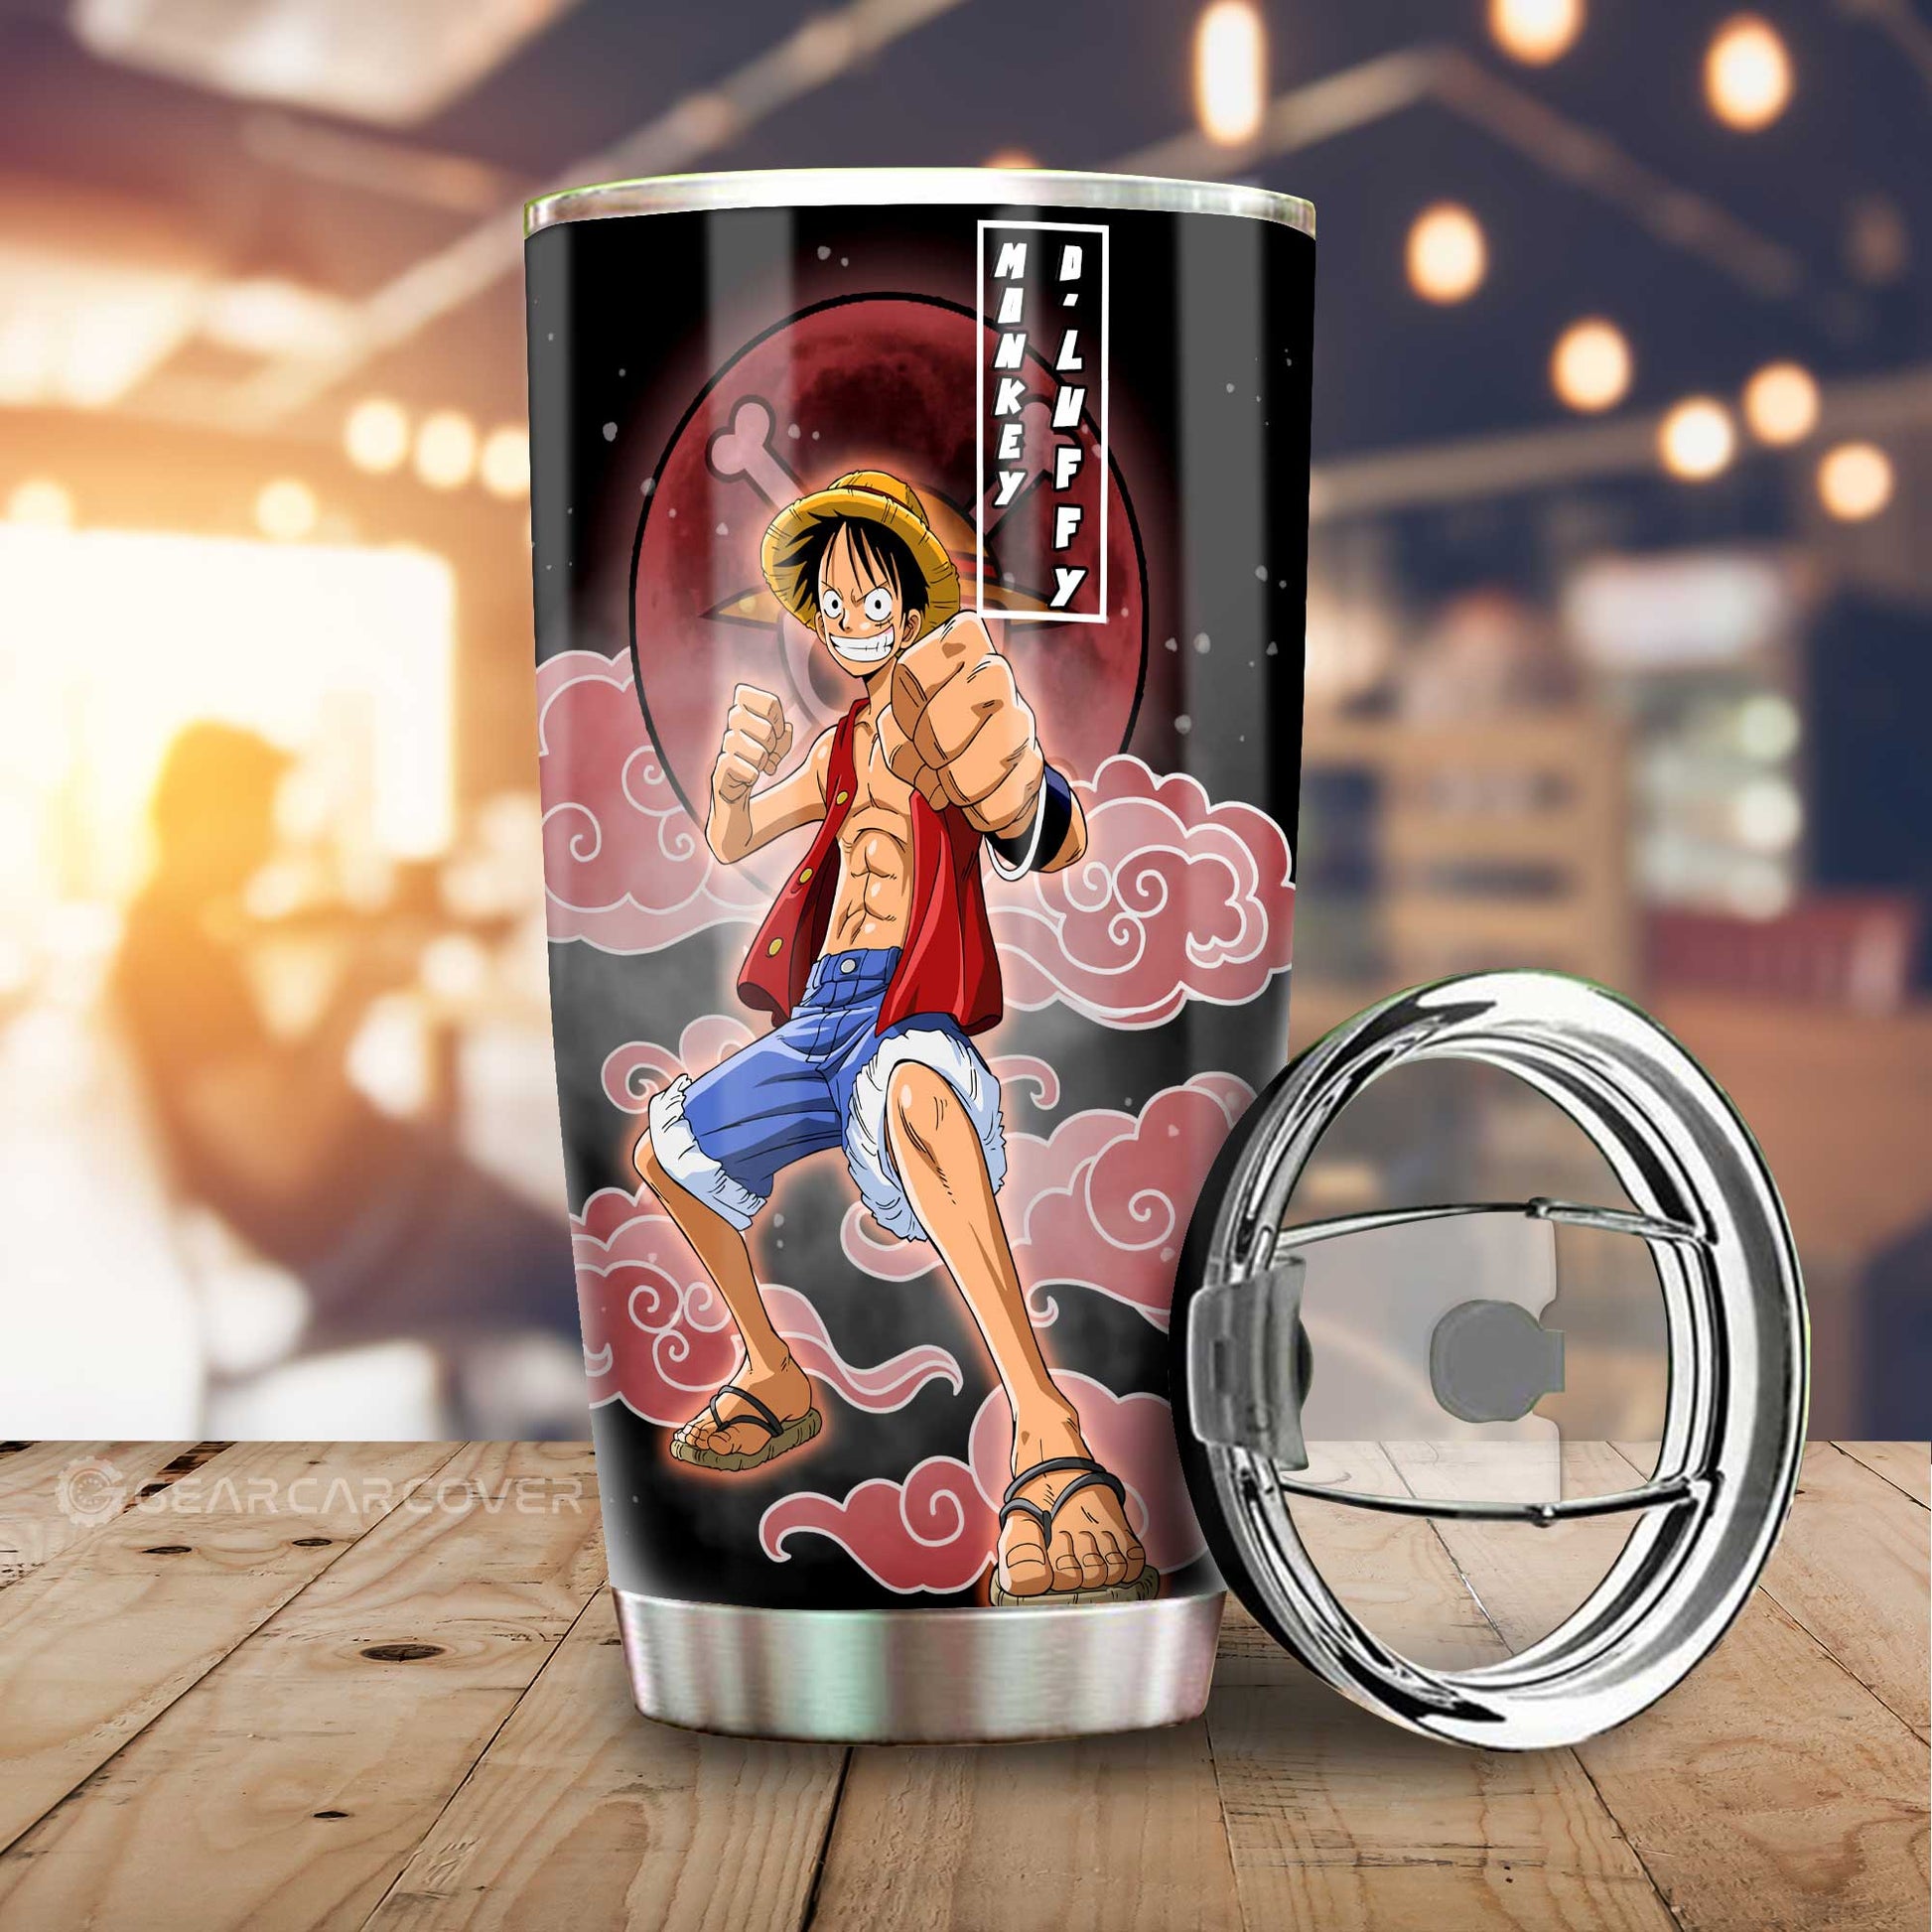 Luffy And Nami Tumbler Cup Custom For One Piece Anime Fans - Gearcarcover - 2